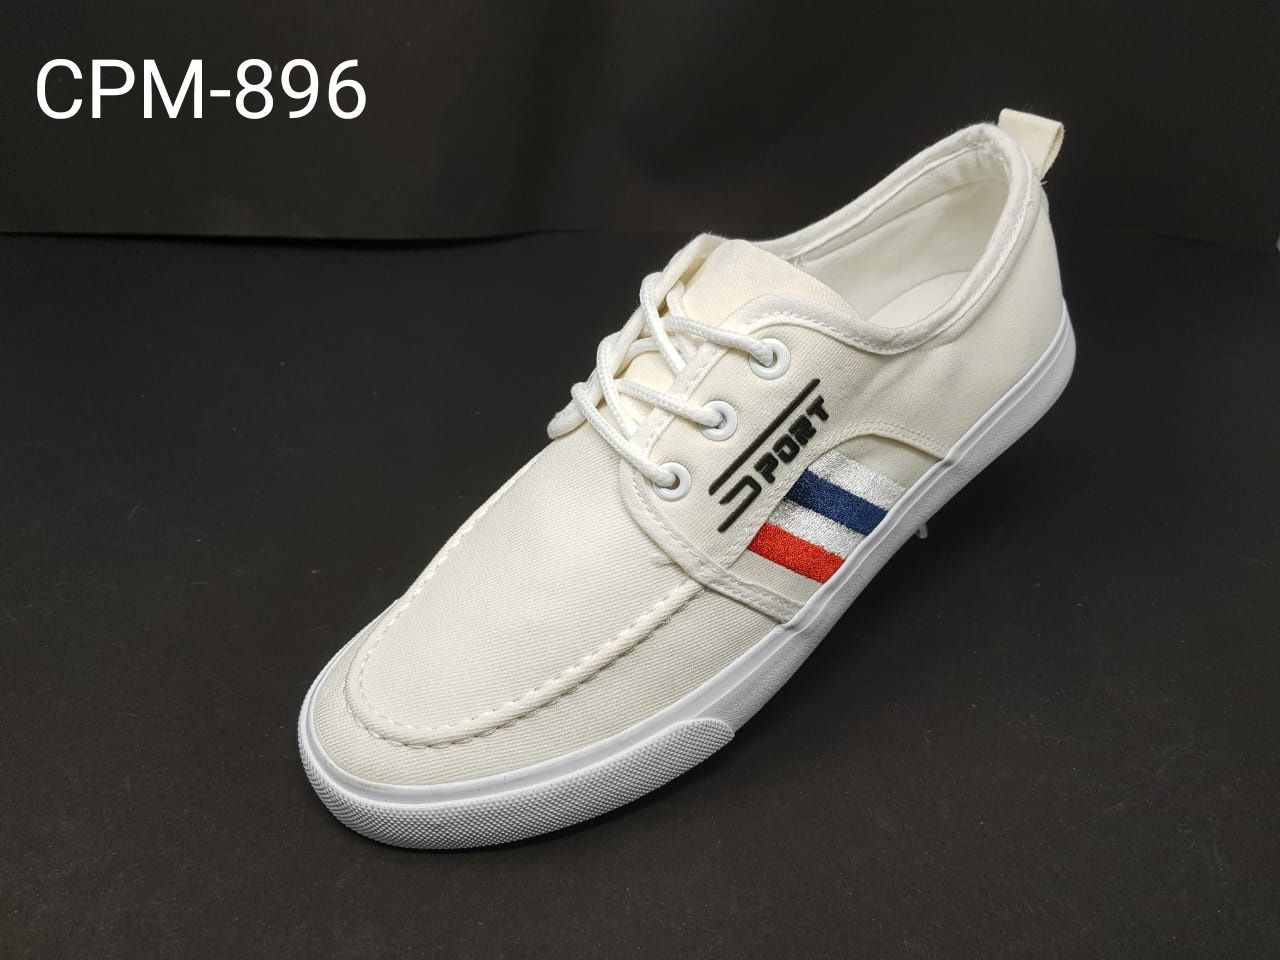 Imported Men's Sneakers, CPM-896 WHITE 